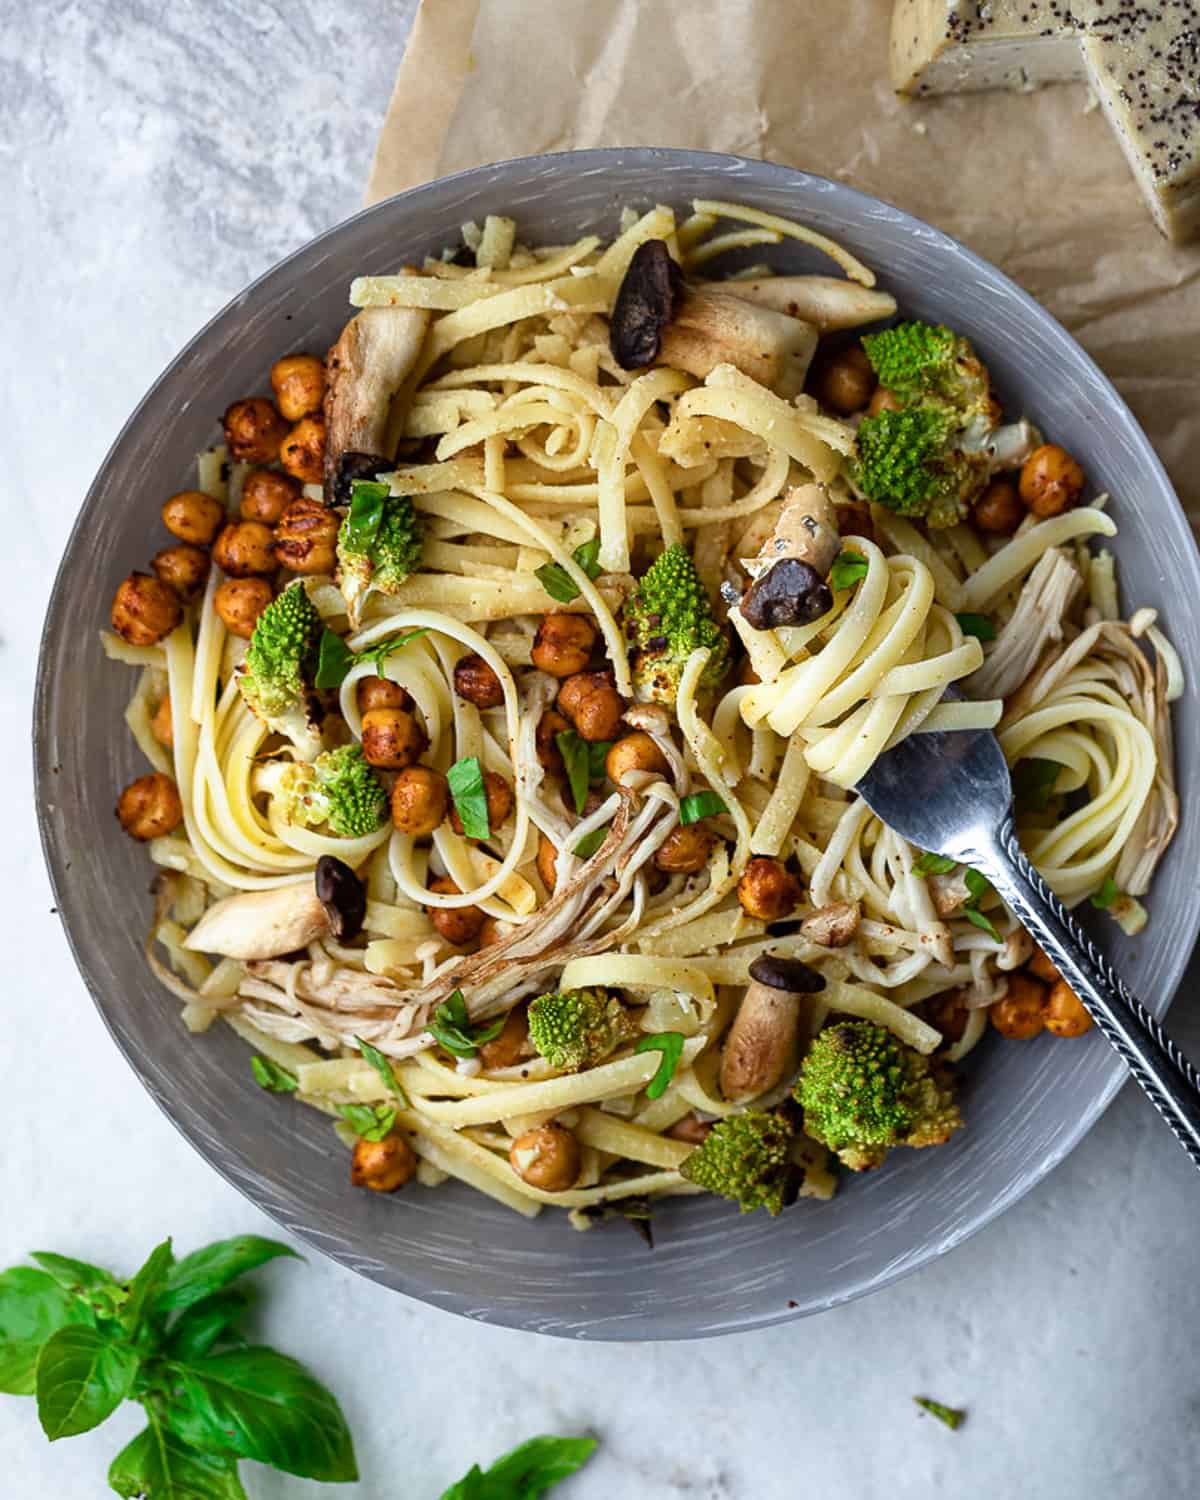 Bowl of vegan creamy pasta sauce topped with roasted mushrooms, chickpeas, and romanesco cauliflower. There is a fork resting on the plate twirled in the pasta.